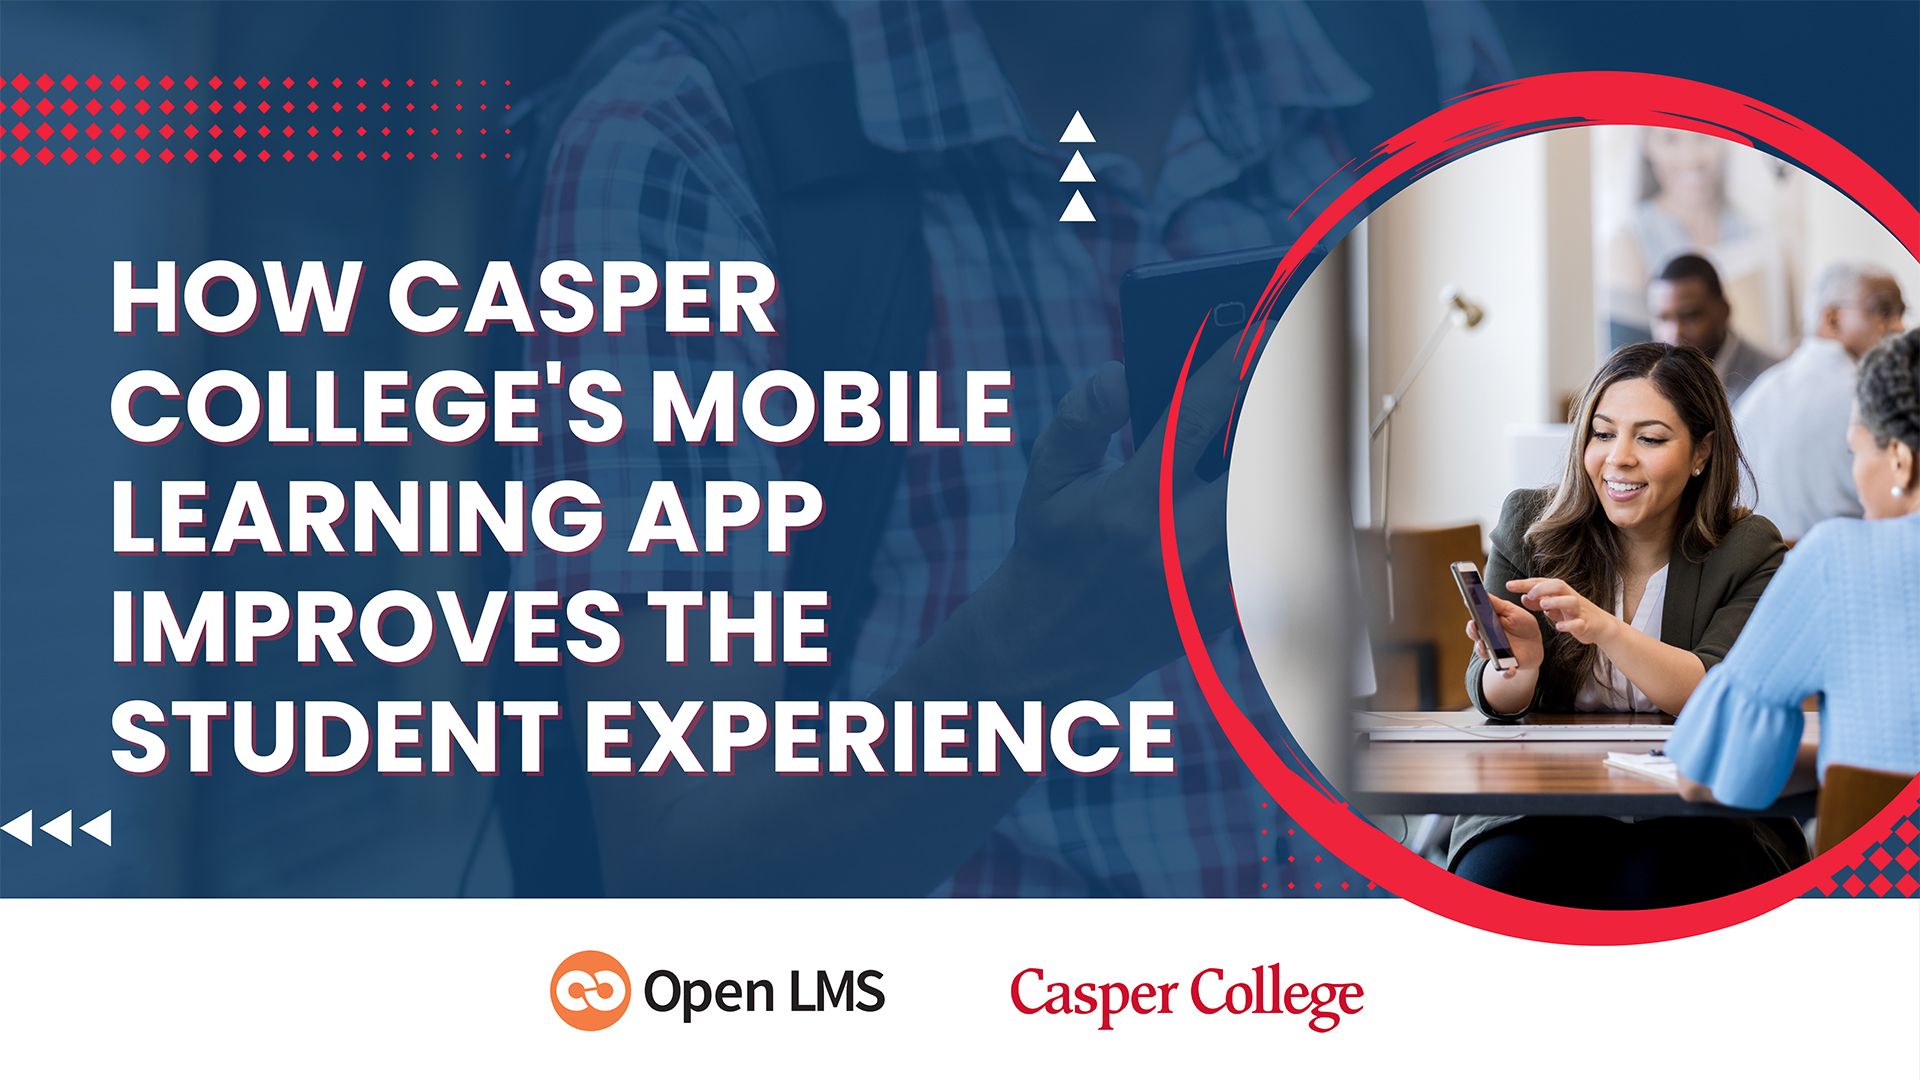 How Casper College's Mobile Learning App Improves the Student Experience